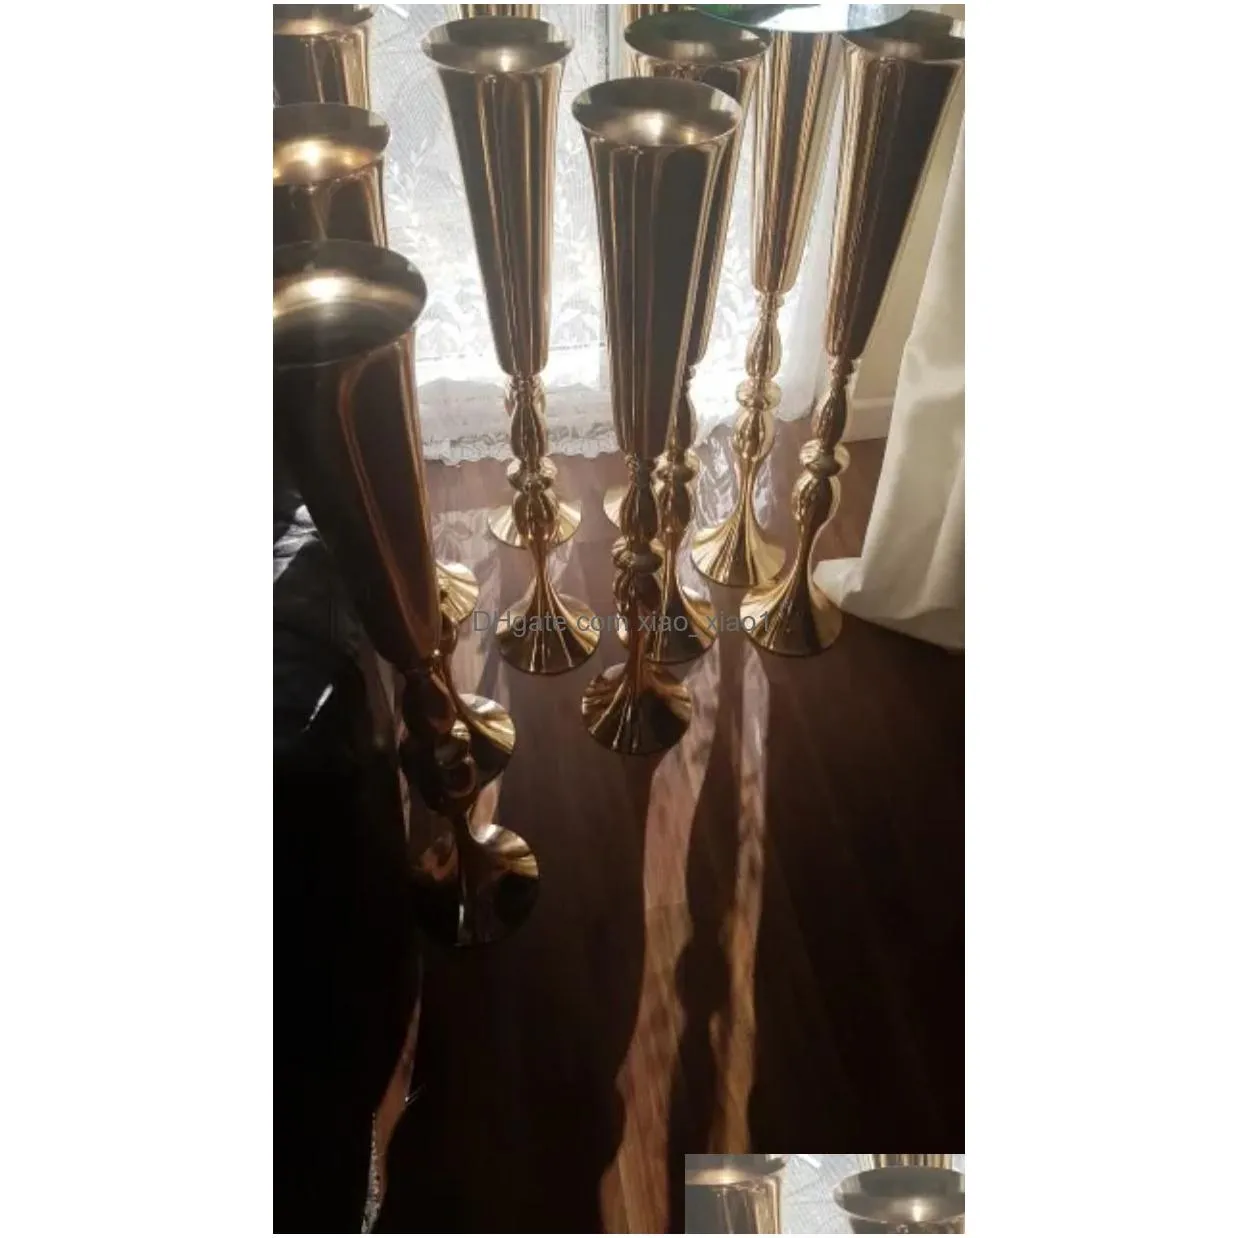 56cm/100cm tall style gold mental road lead wedding vase wedding table centerpieces event party flower rack home decoration